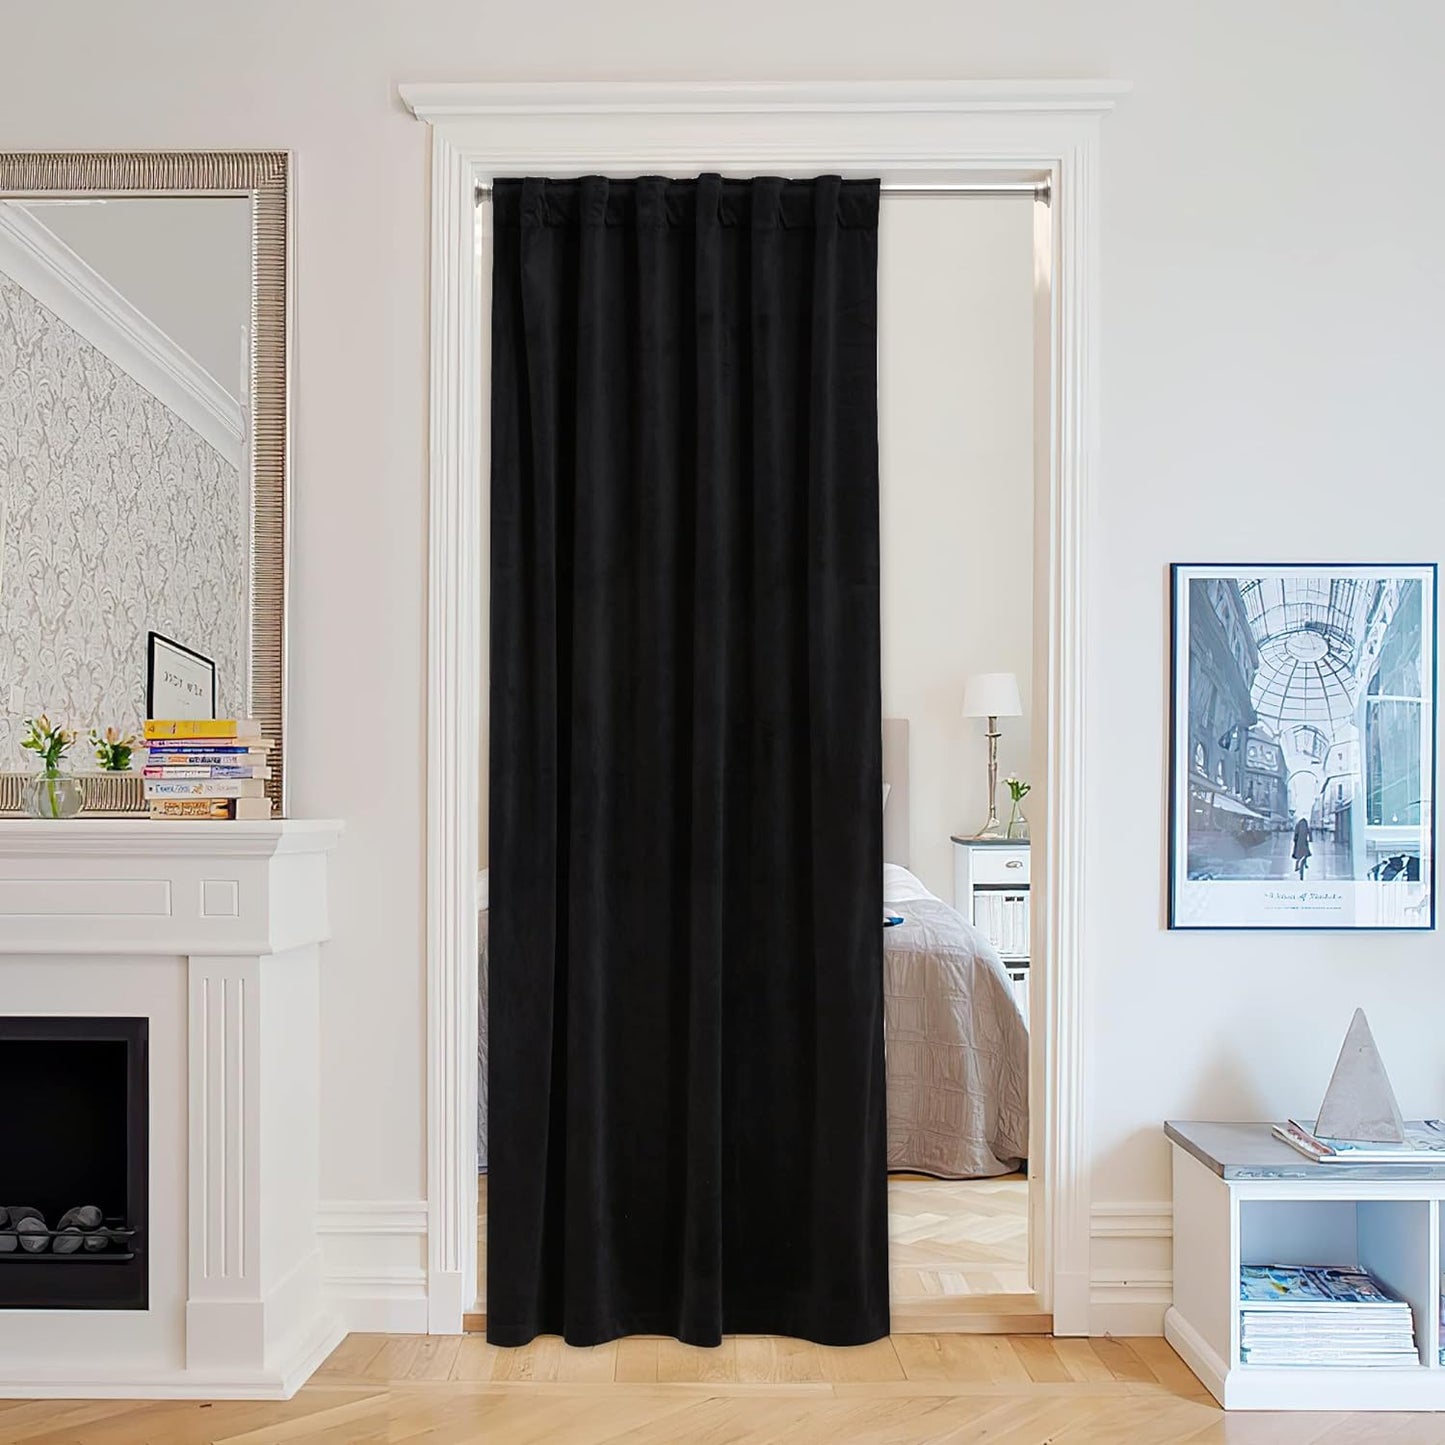 Stangh Navy Blue Velvet Curtains 96 Inches Long for Living Room, Luxury Blackout Sliding Door Curtains Thermal Insulated Window Drapes for Bedroom, W52 X L96 Inches, 1 Panel  StangH Black W52 X L80 